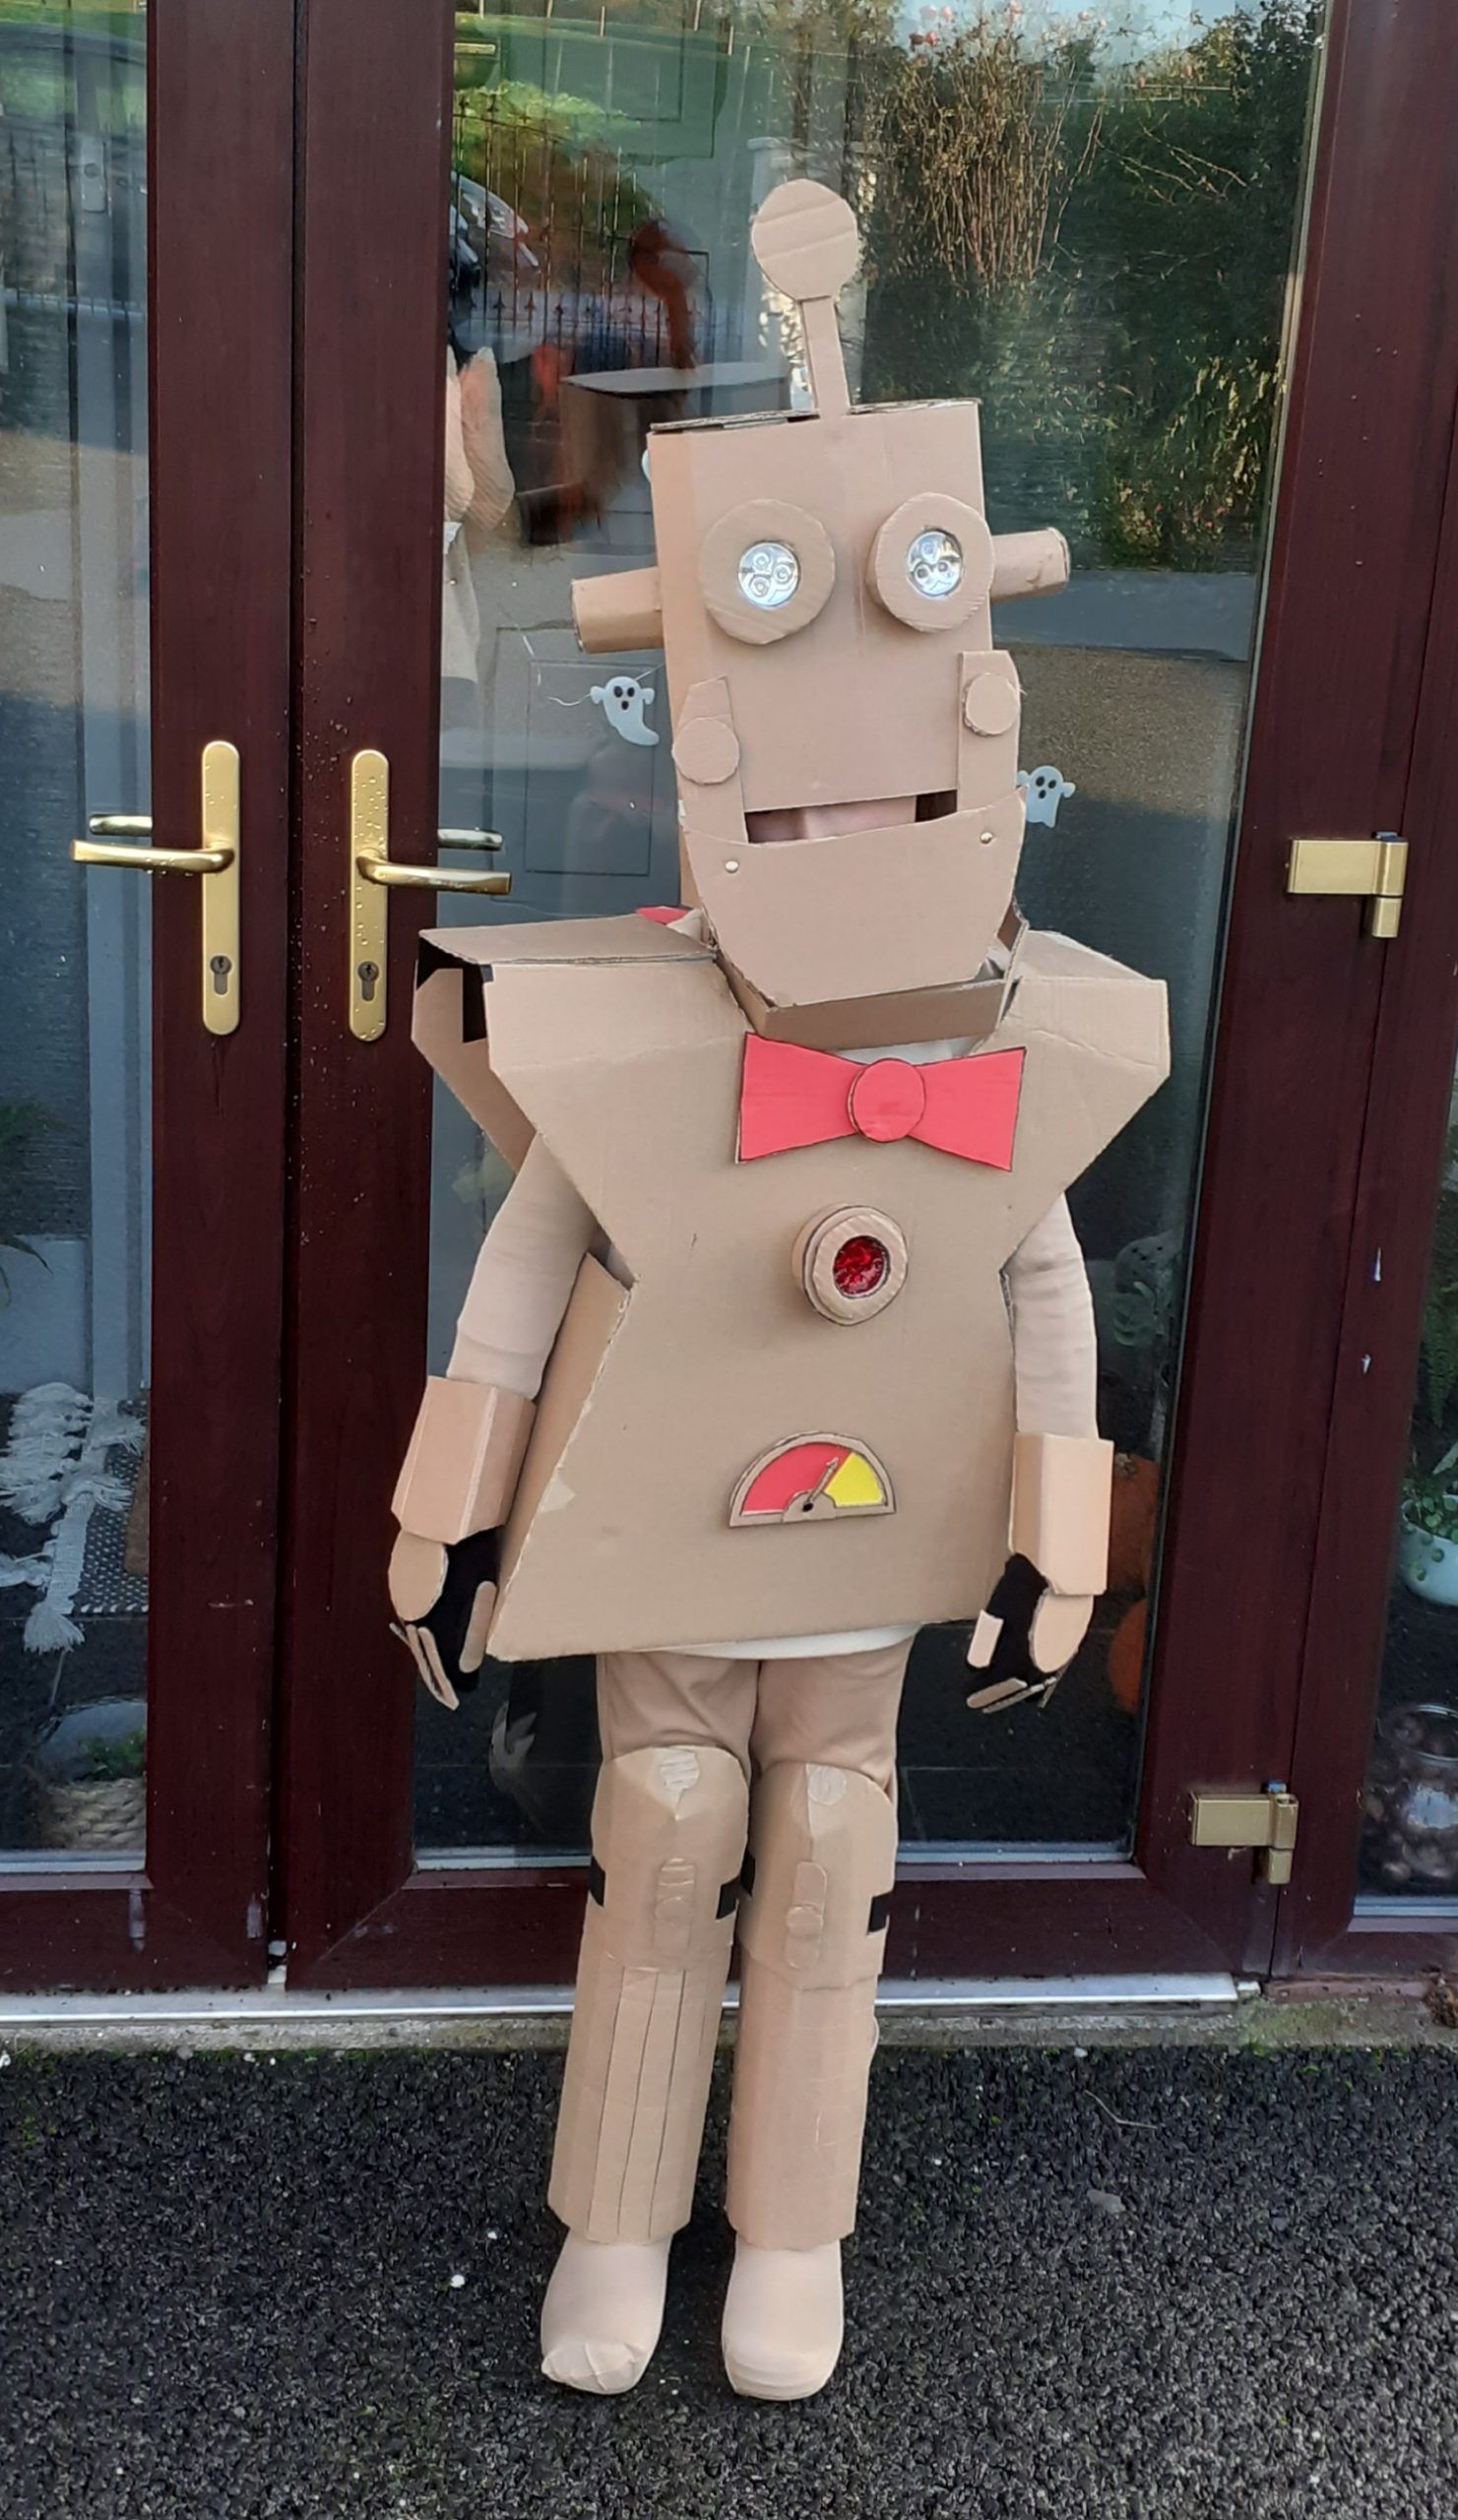 Cool Cardboard Robot Costume with Lights